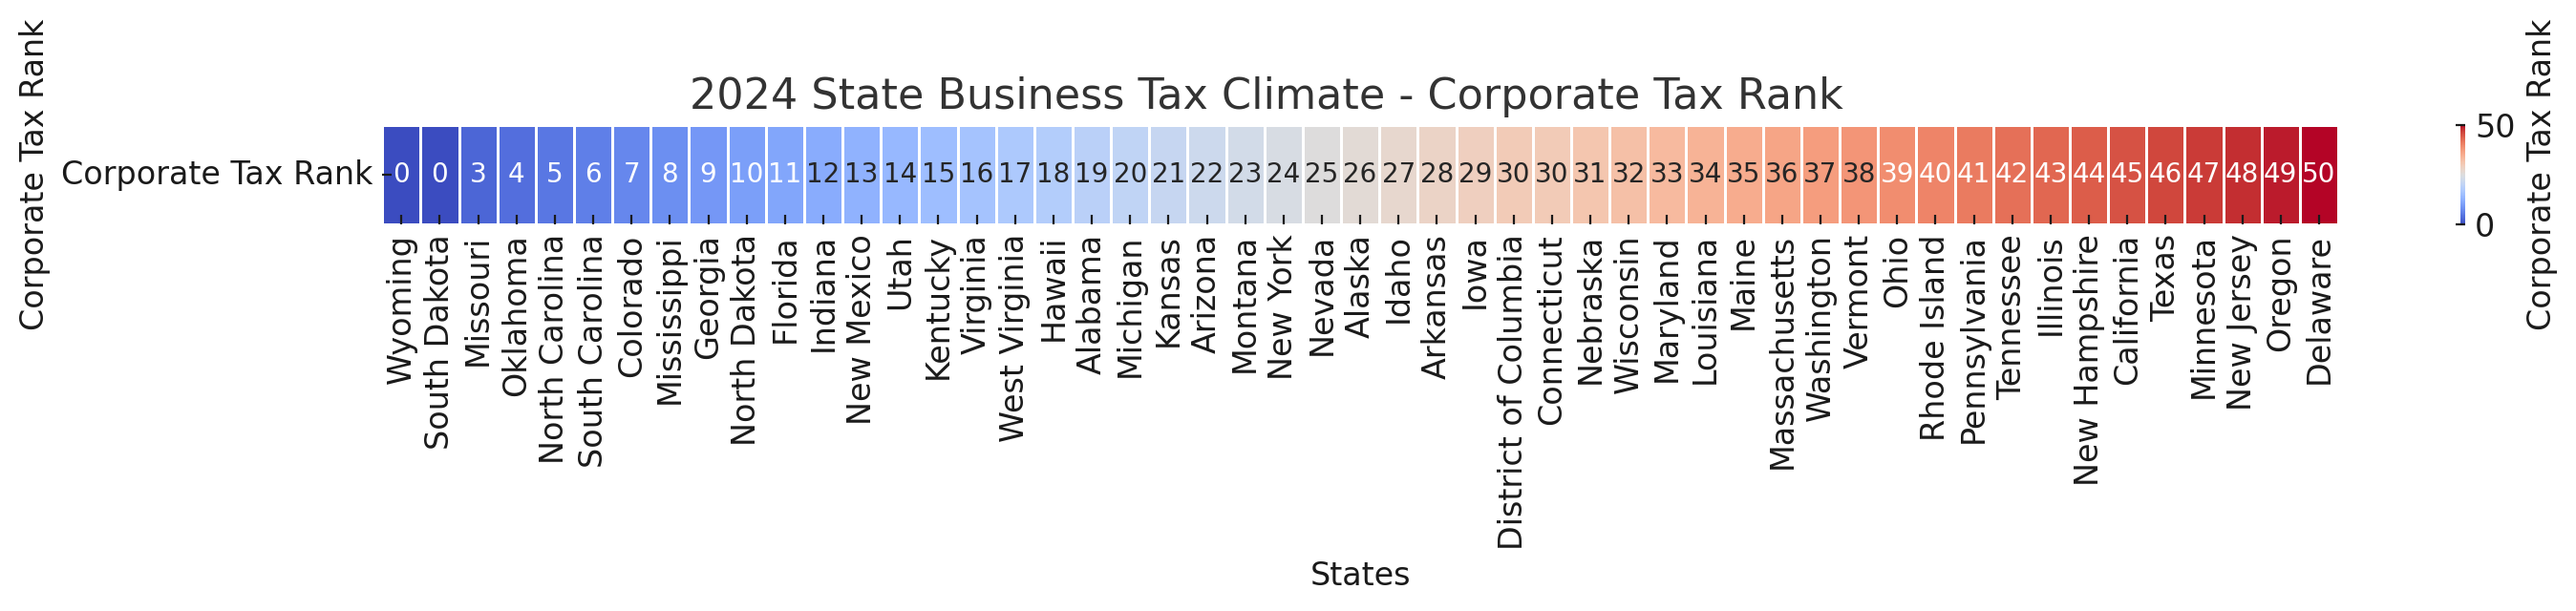 2024-corporate-tax-rank-by-state